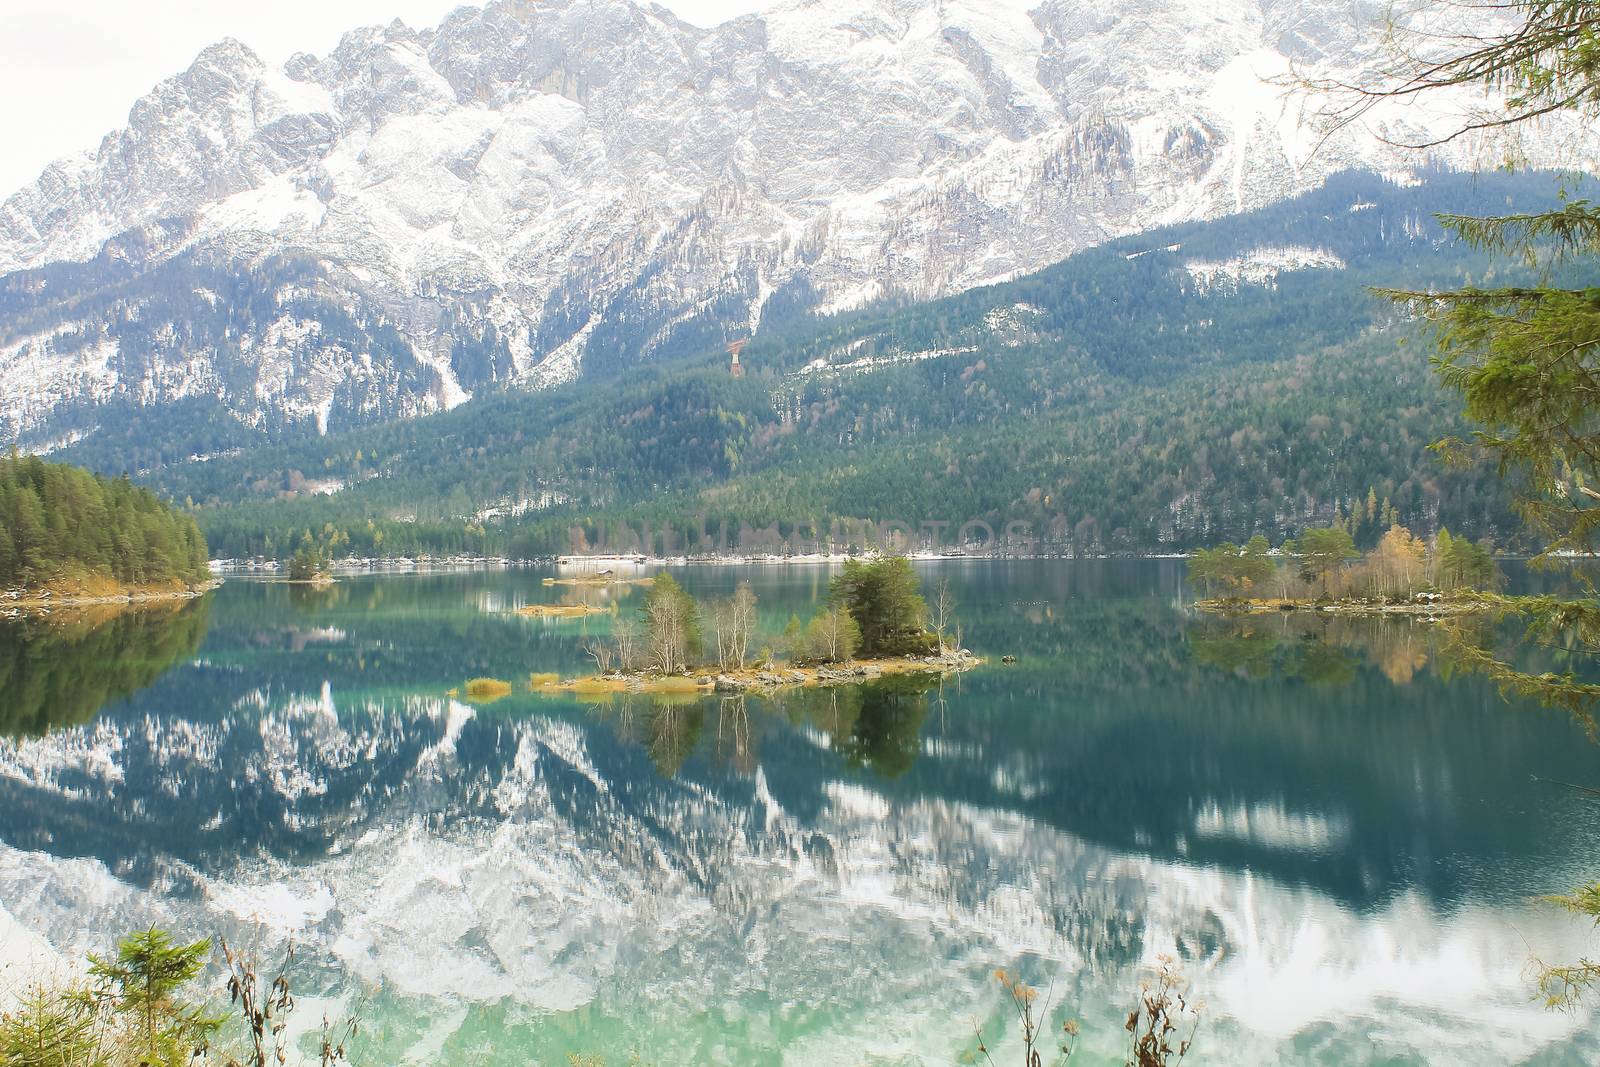 View of the Eibsee